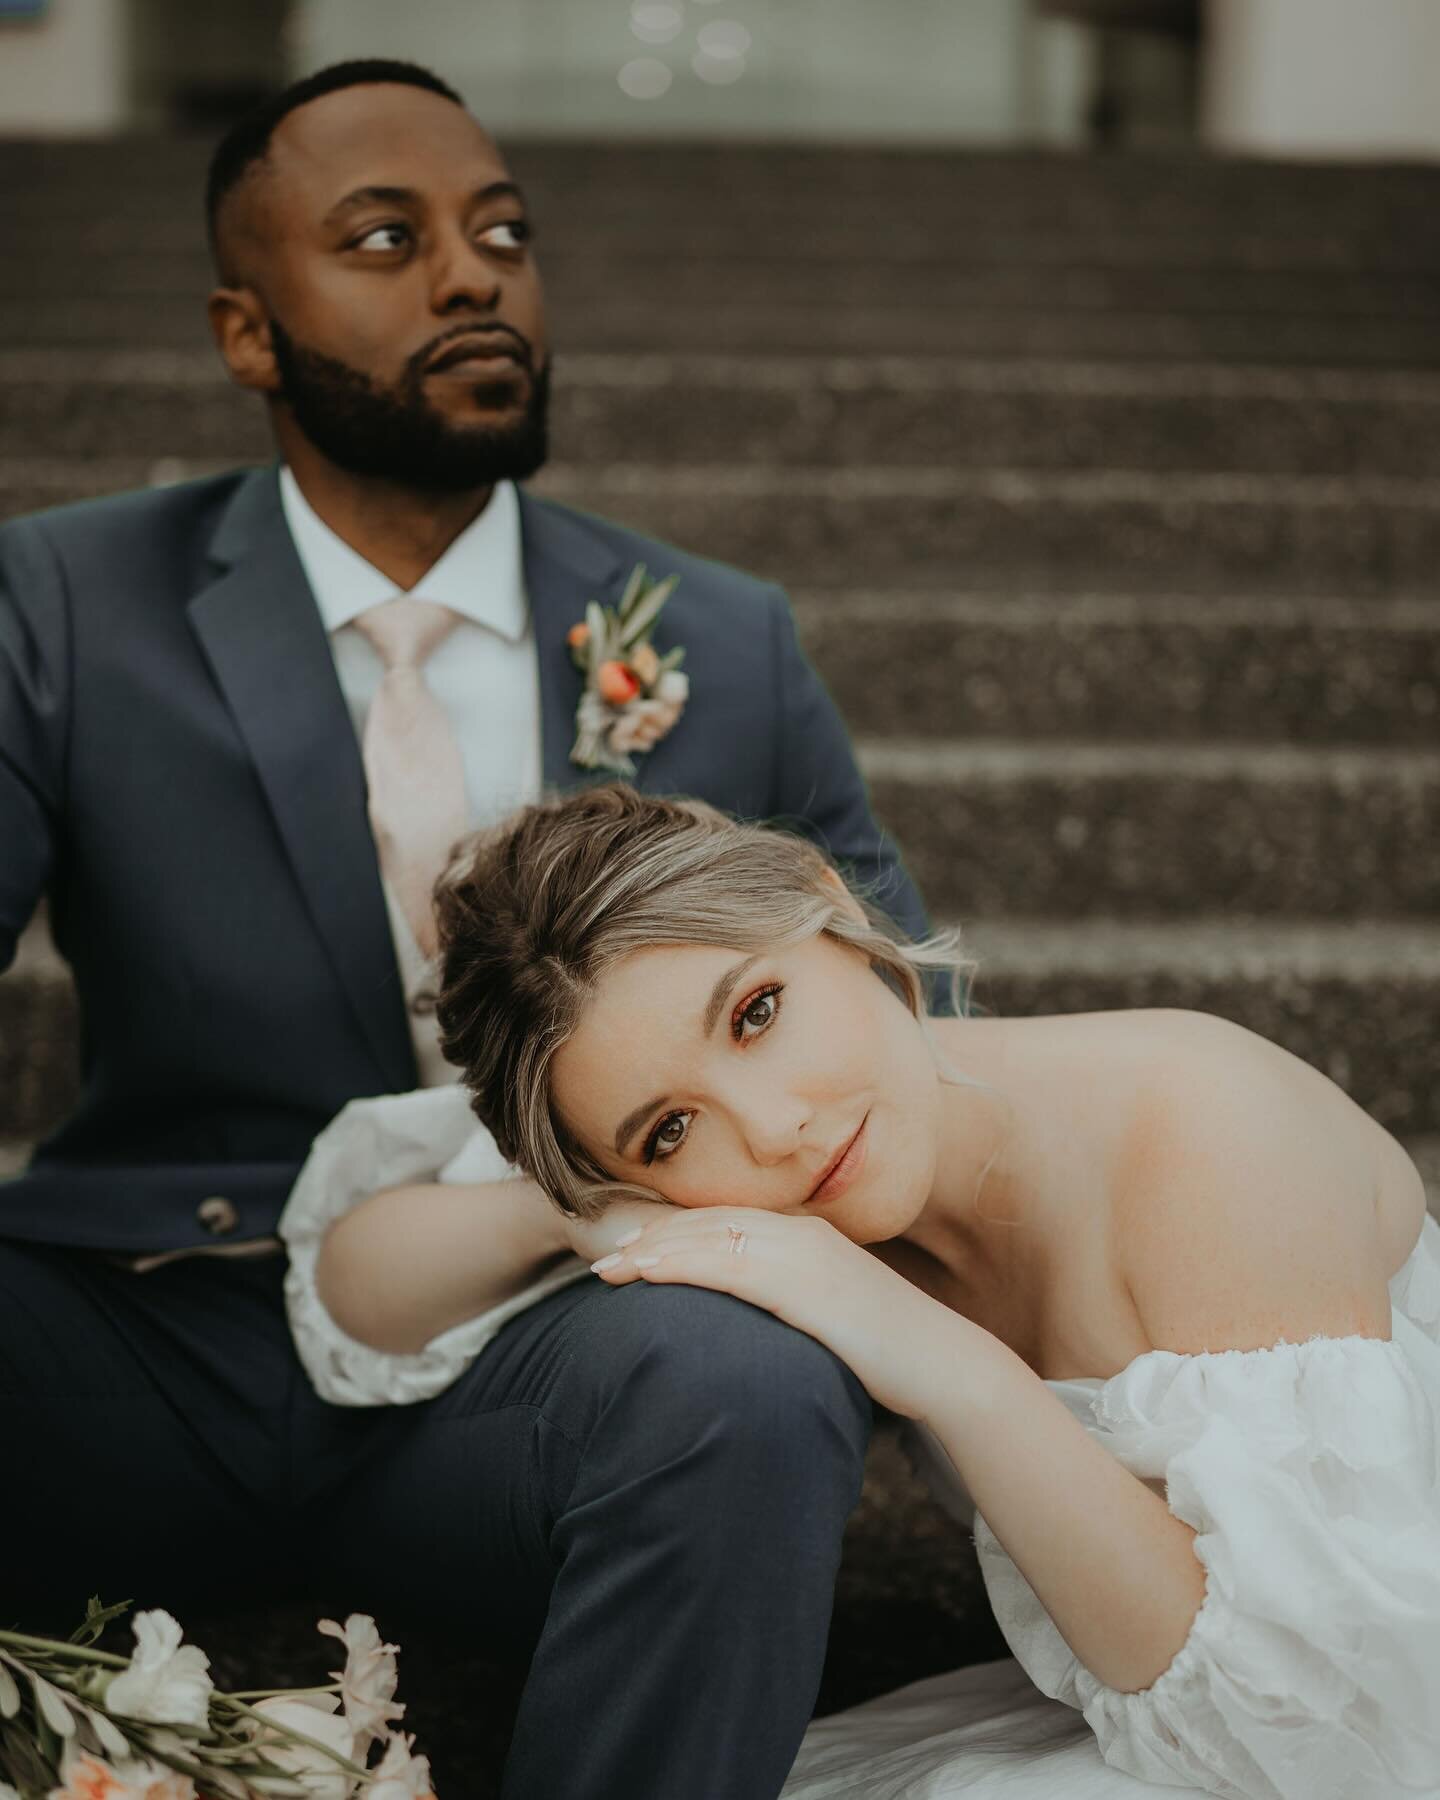 This shoot was special, so fun to work with colour! 
Brought to you by a very talented team:

@rivkah_foto
@makeupbysquish
@everystrandmatters 
@ashleymarieparris 
@shotsbyparris
@deltavictoria
@brownstheflorist
@yourdreamthemeeventdesign
@jbstylze
@